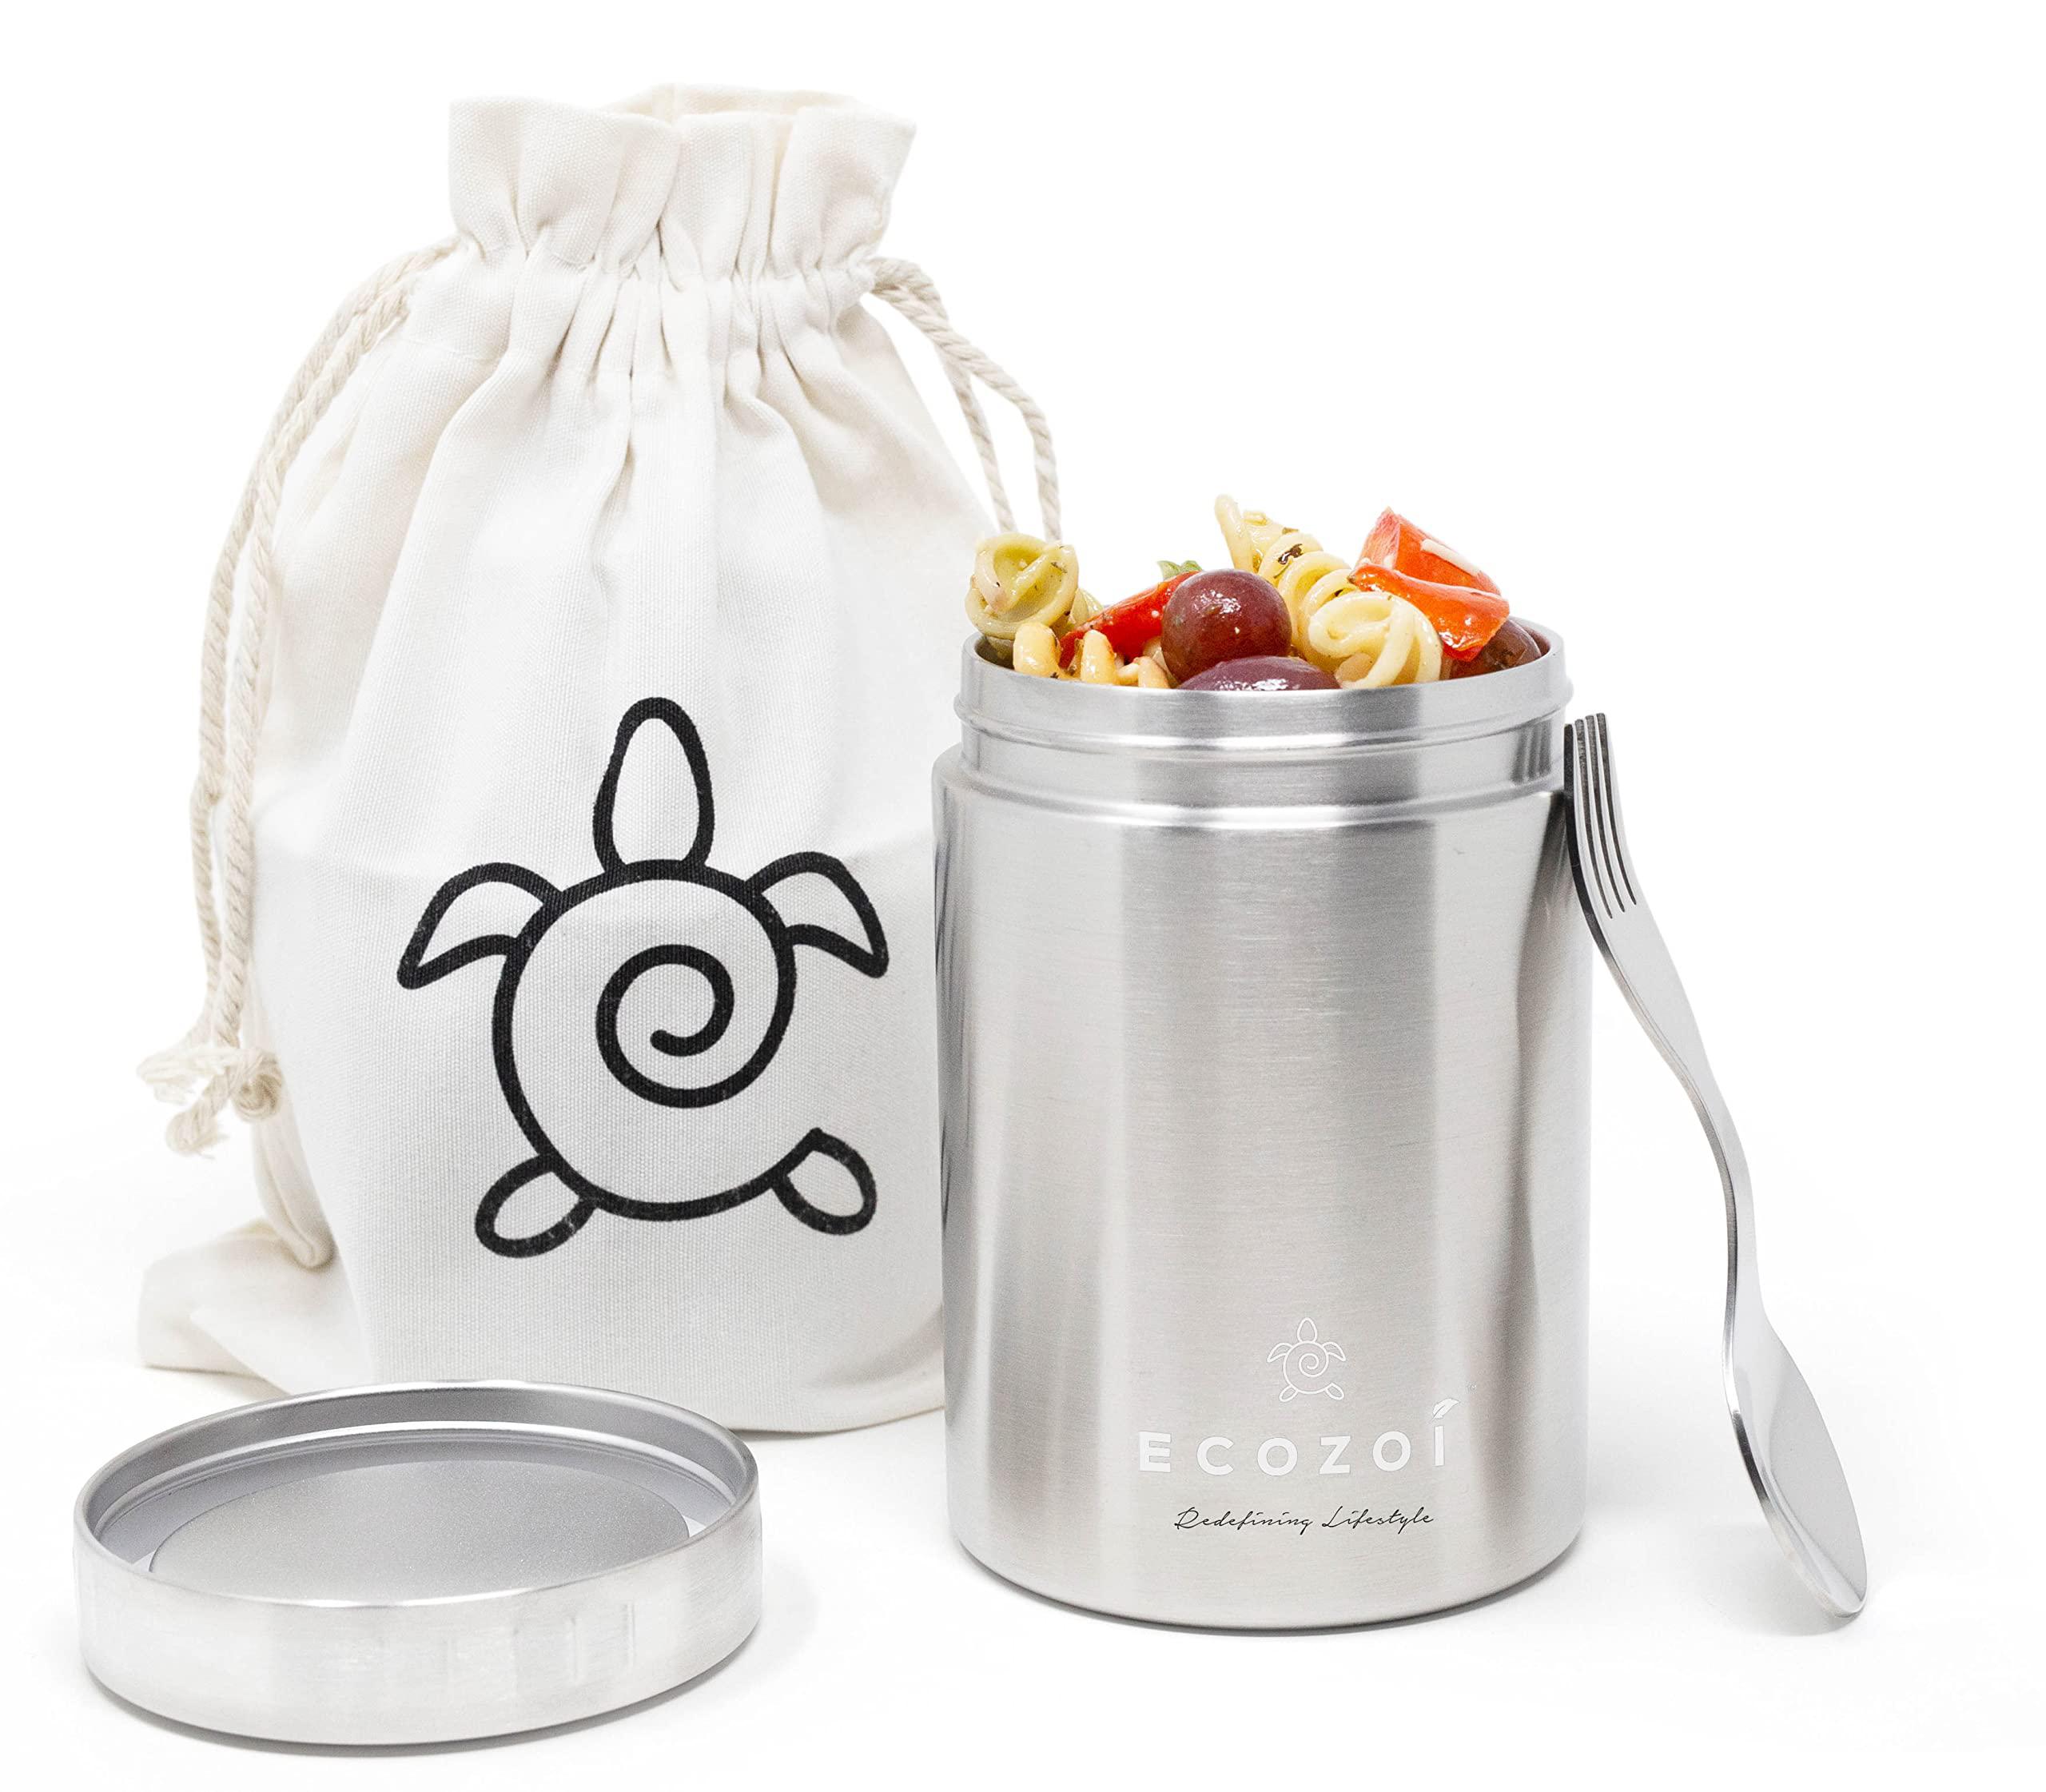 ecozoi stainless steel insulated lunch box, food jar - vacuum insulated thermos, 17 oz + spork + lunch bag